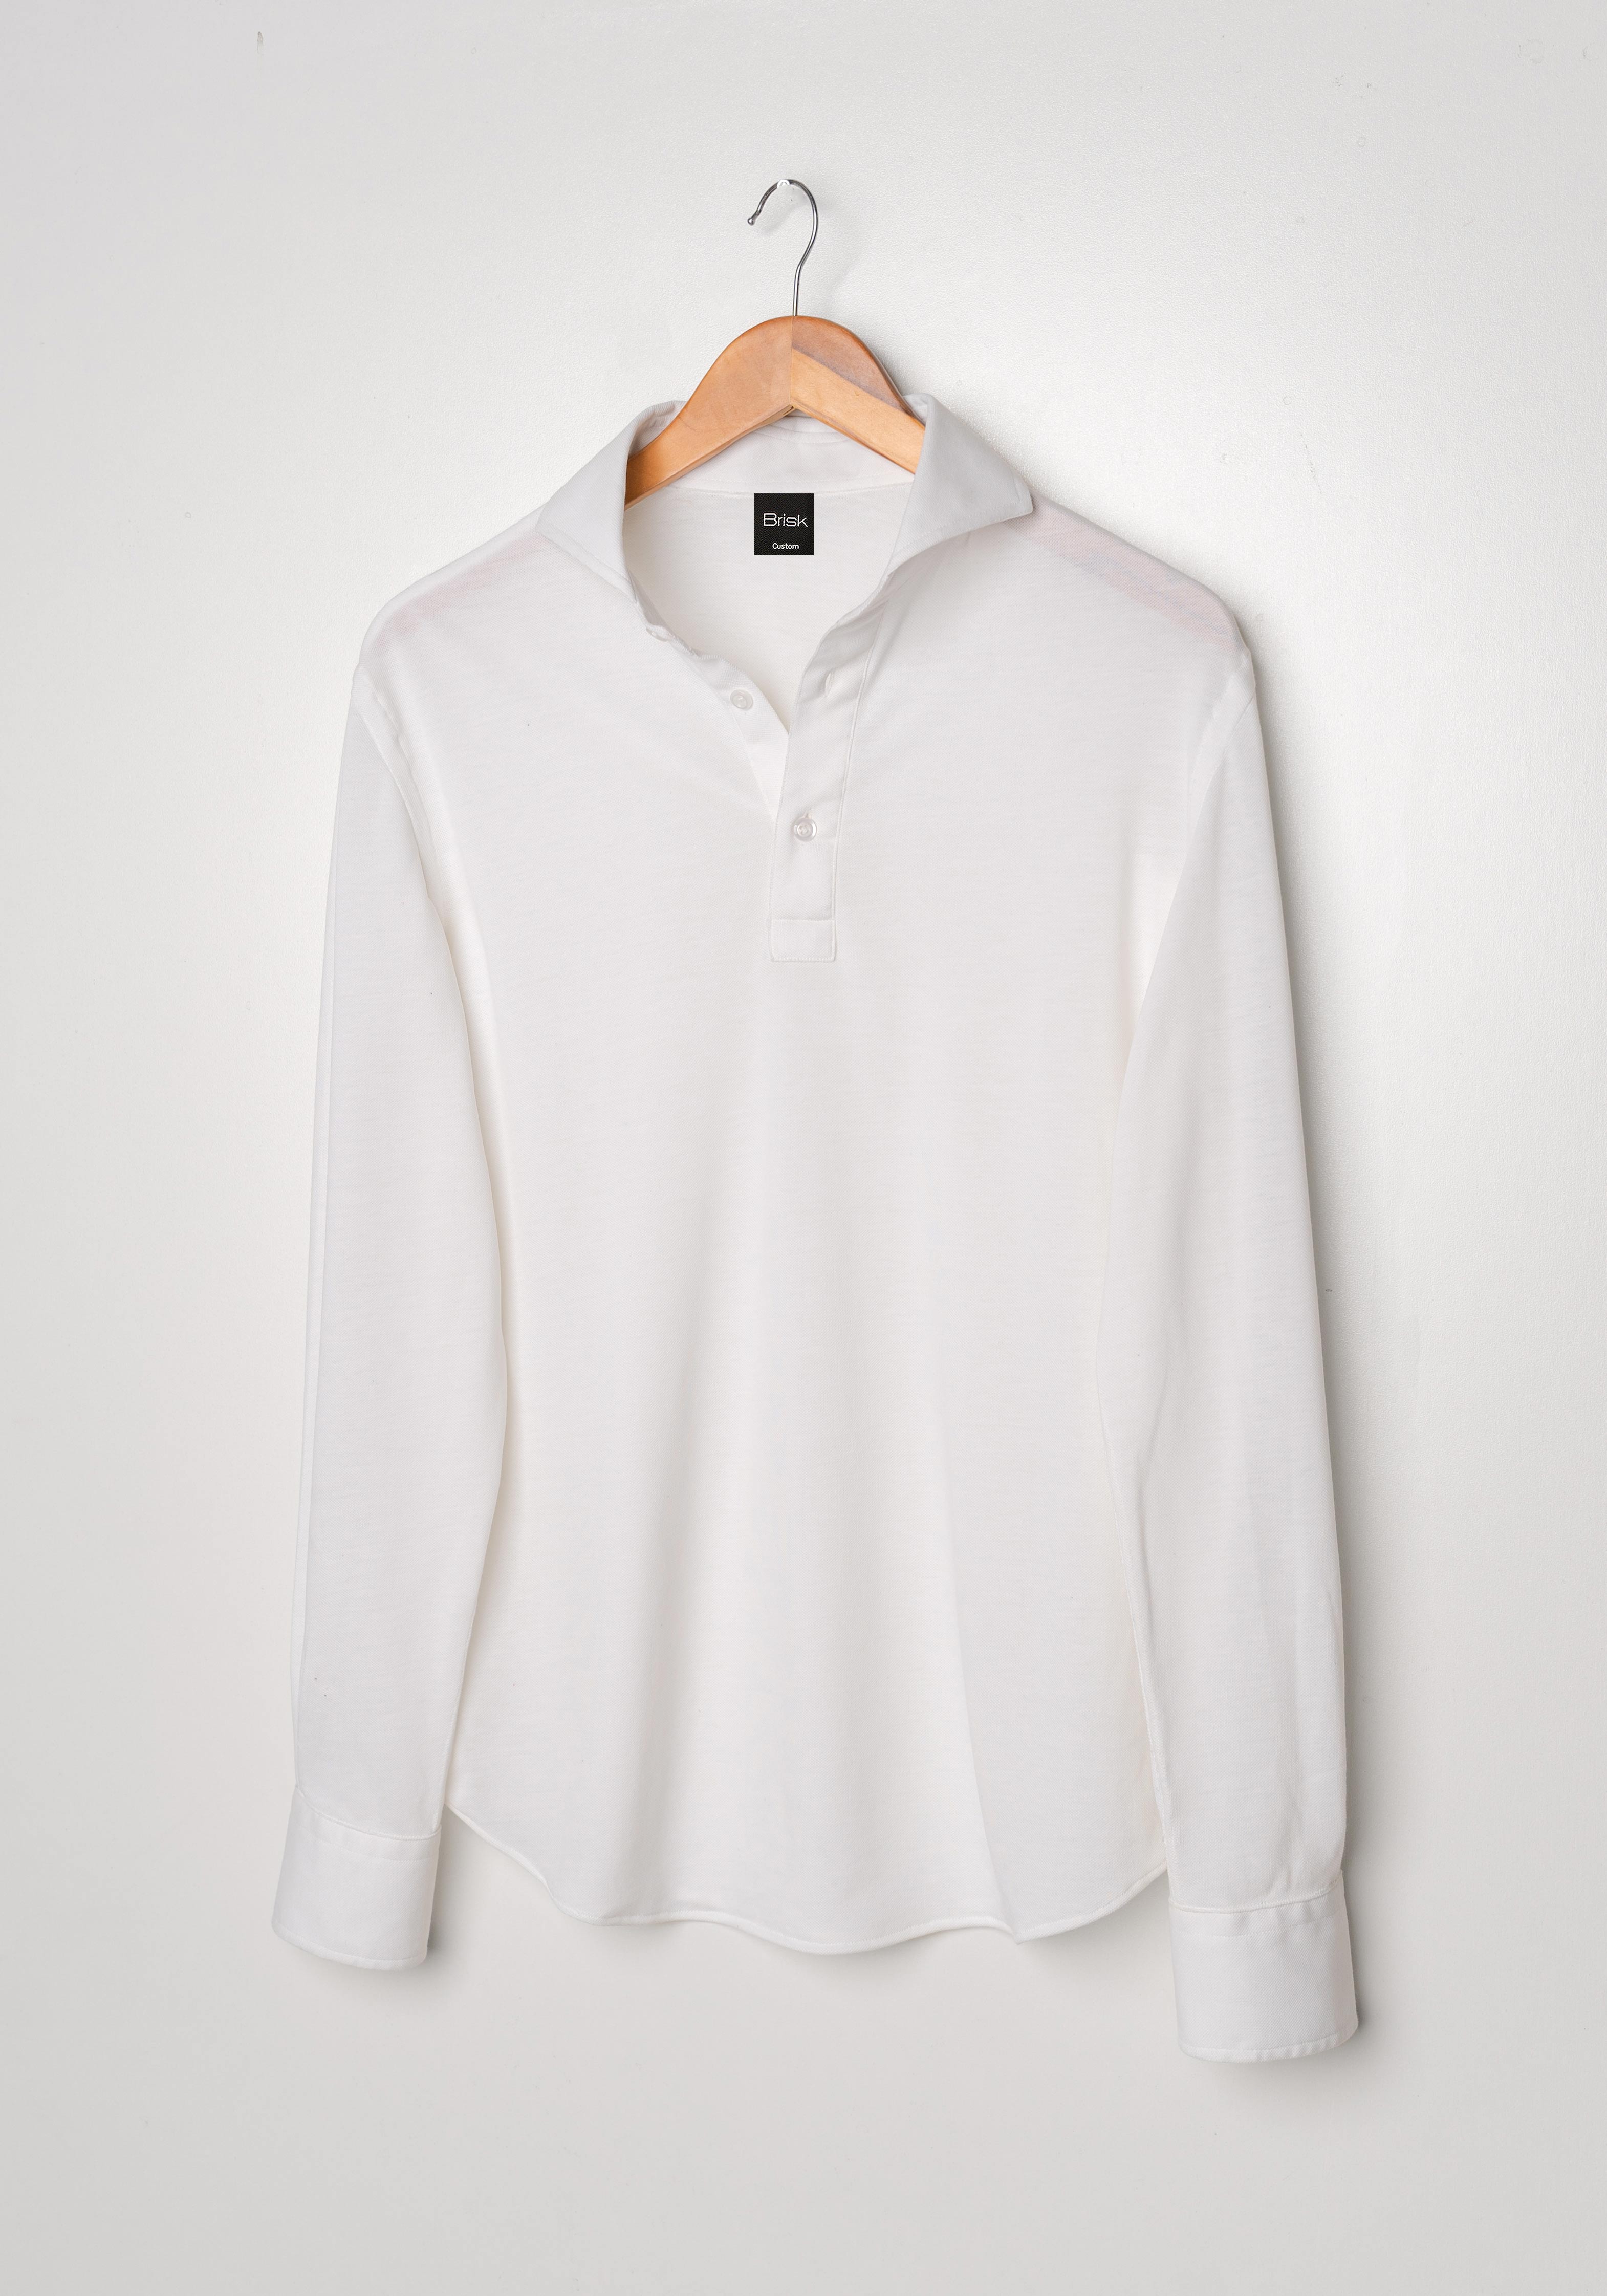 Image of White Feather Soft Piqué Full Sleeve Polo Shirt